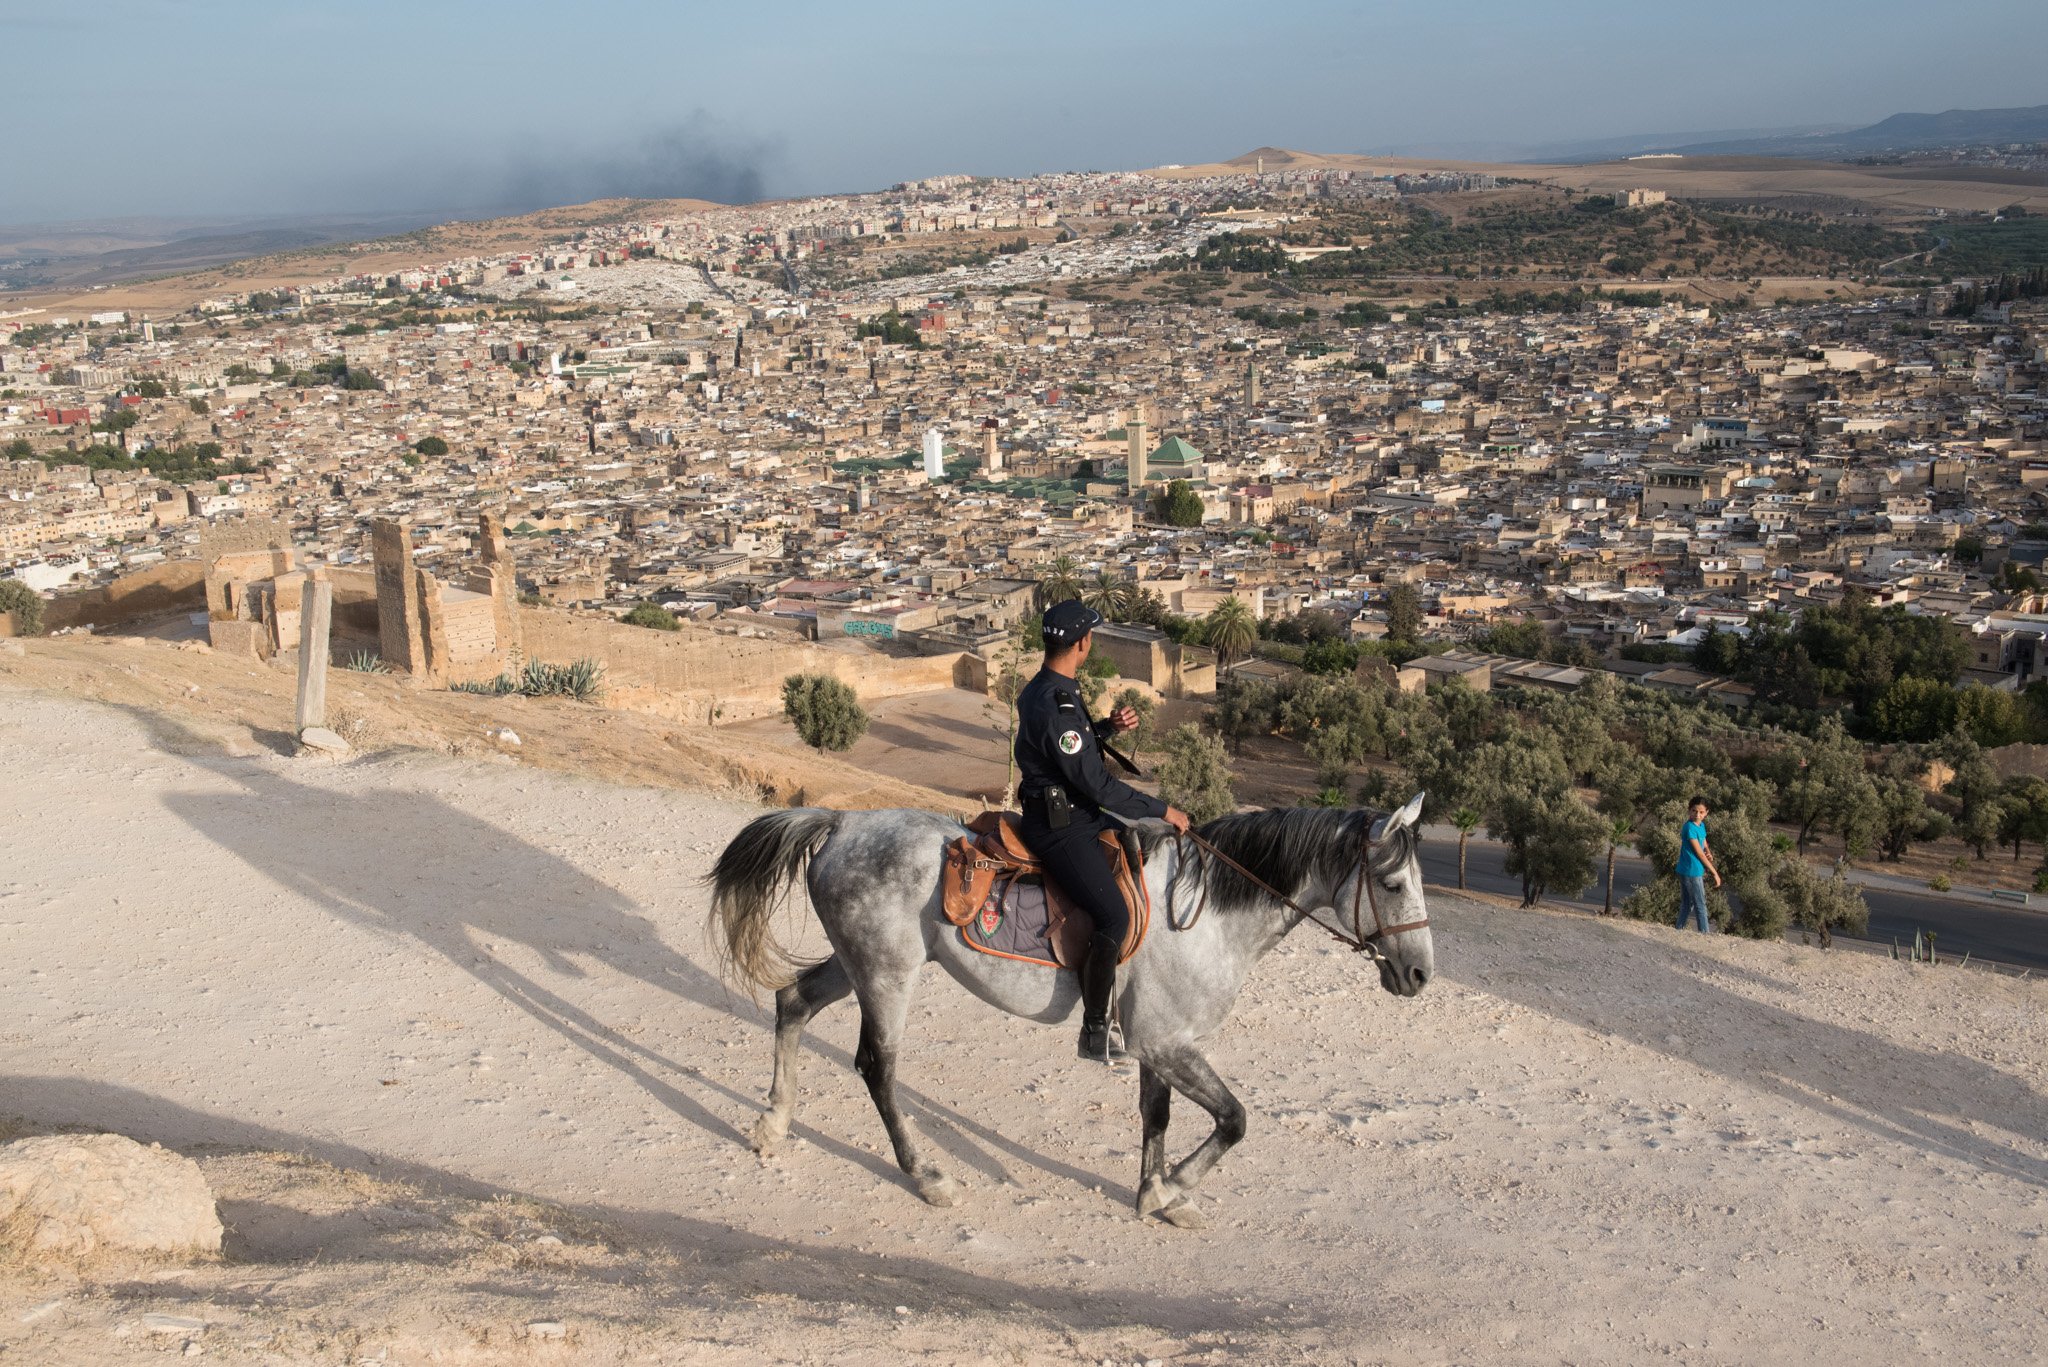    Morocco - Fes    Policeman on horse protecting ancient site 